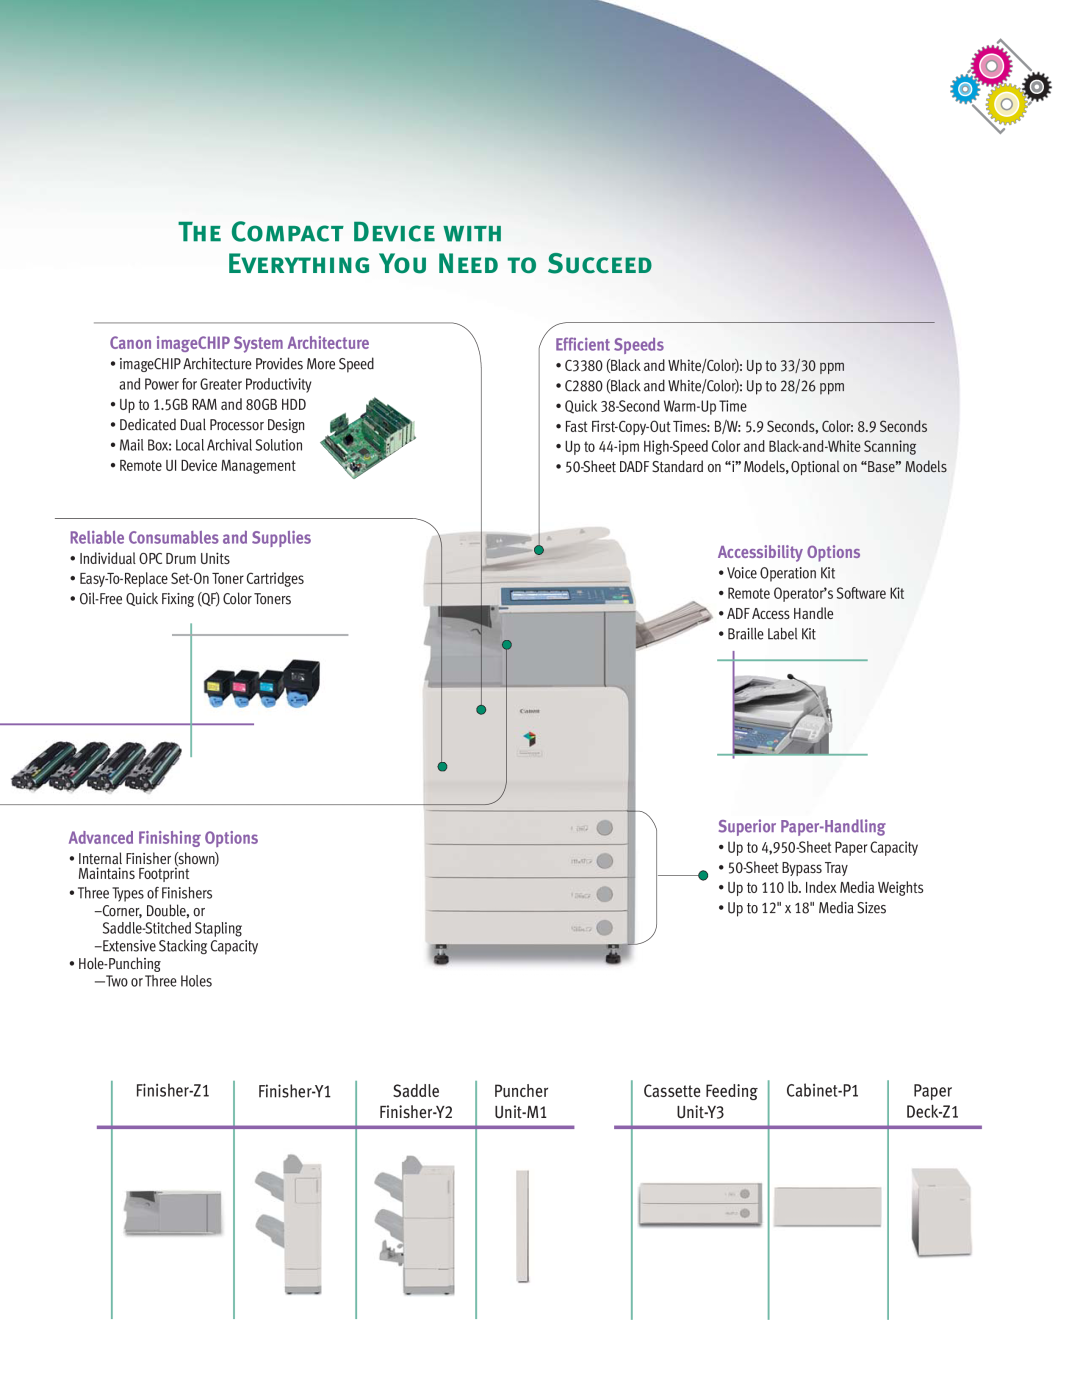 Canon C3380 Series Canon imageCHIP System Architecture, Reliable Consumables and Supplies, Advanced Finishing Options 